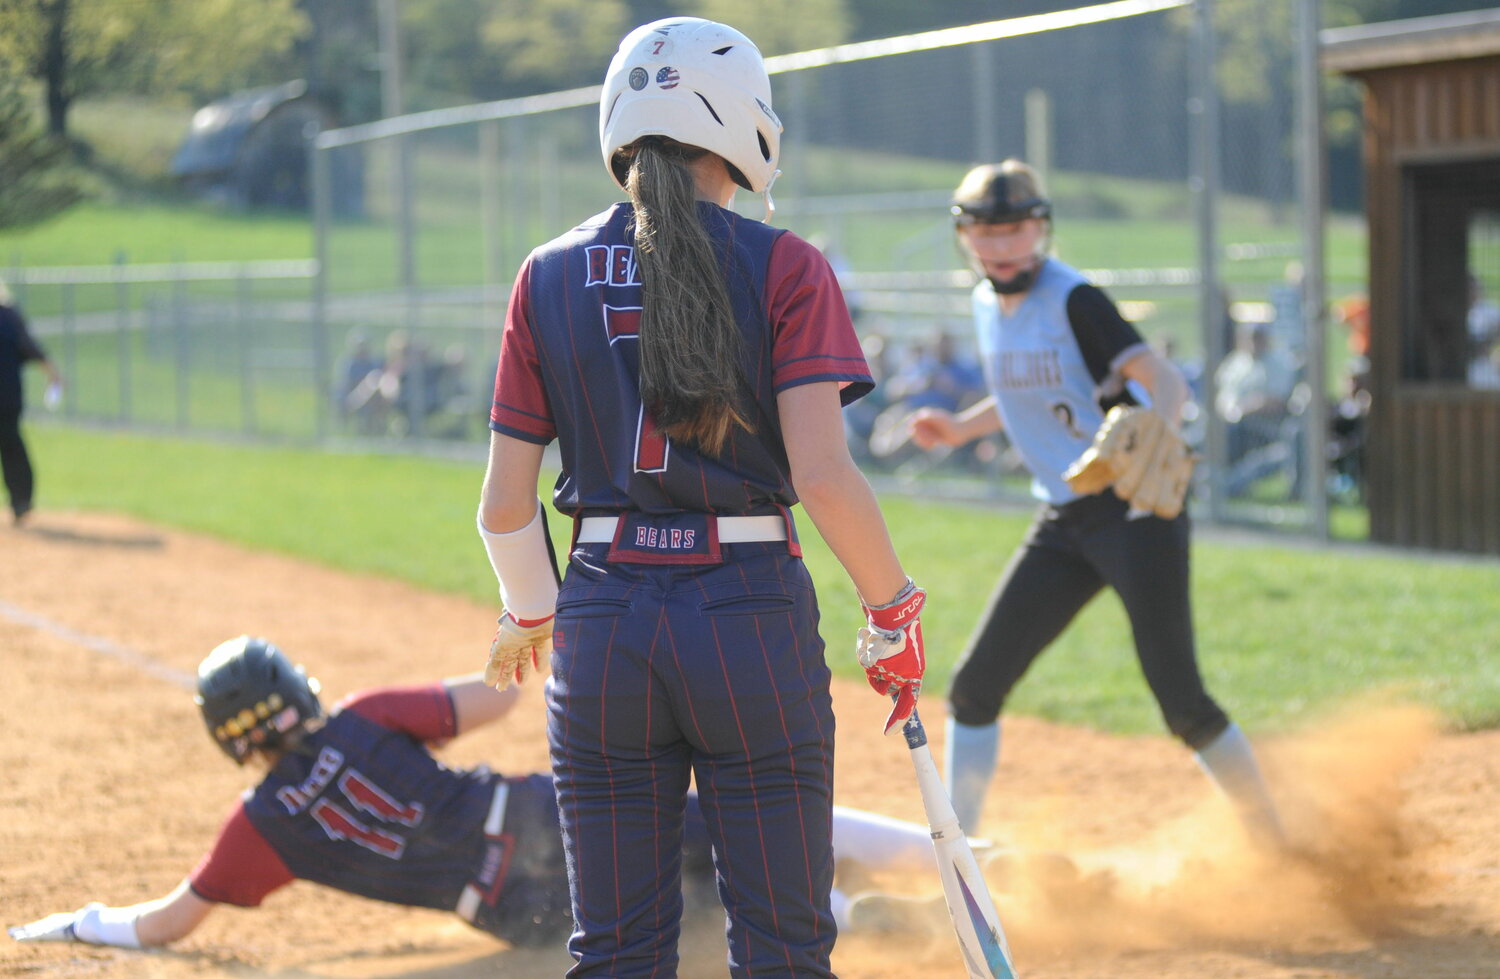 Waiting in the wings. Tri-Valley’s Kaytlyn Ingrassia waits her turn at bat while her teammate Kaitlyn Stungis slides home against Lady Bulldogs pitcher Liz Reeves.